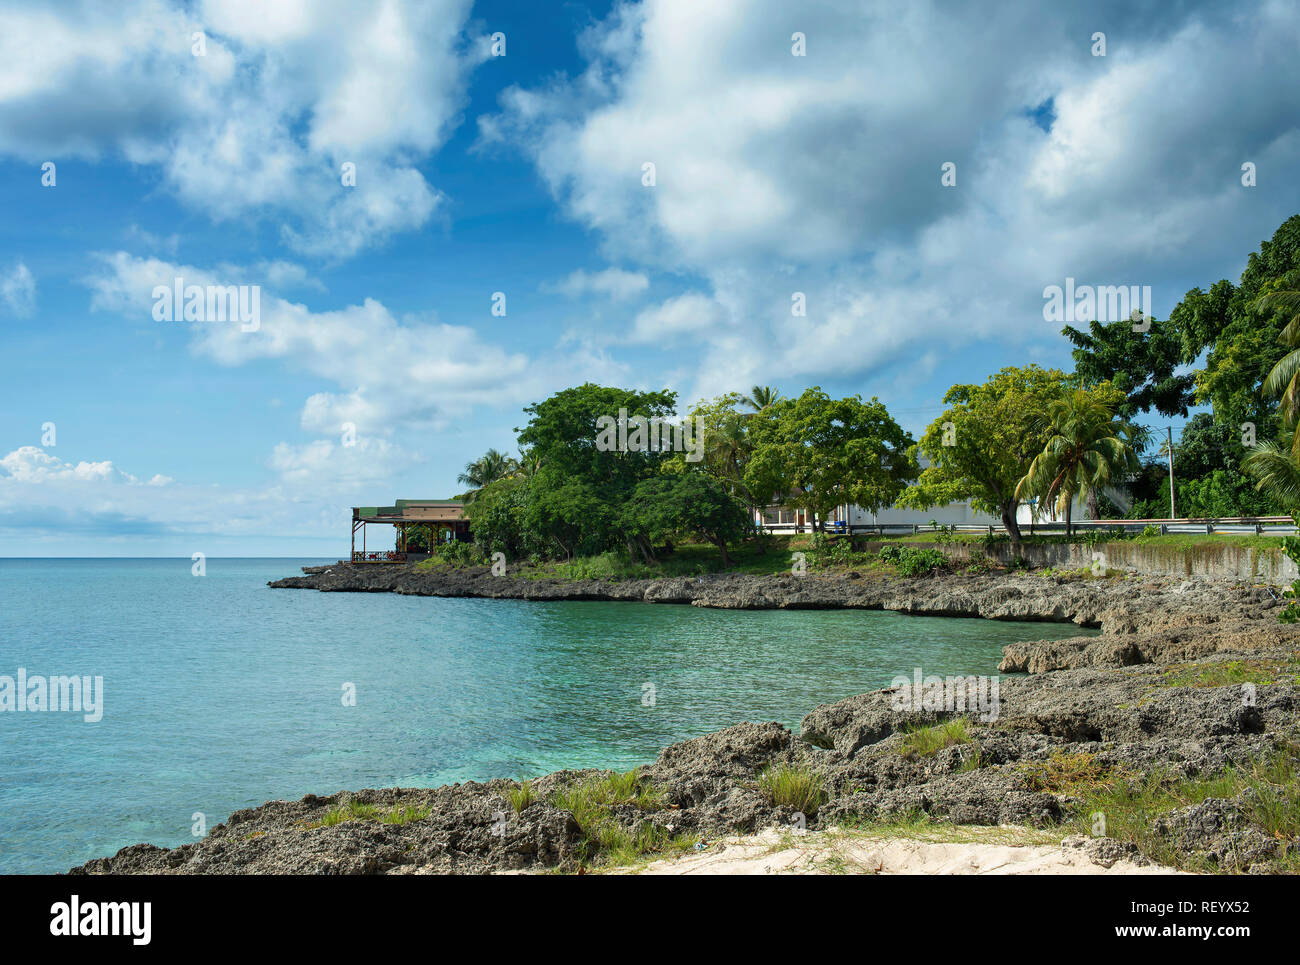 The picturesque rocky coast of San Andrés island, Colombia. Photograph taken in front of Schooner Bight. Oct 2018 Stock Photo